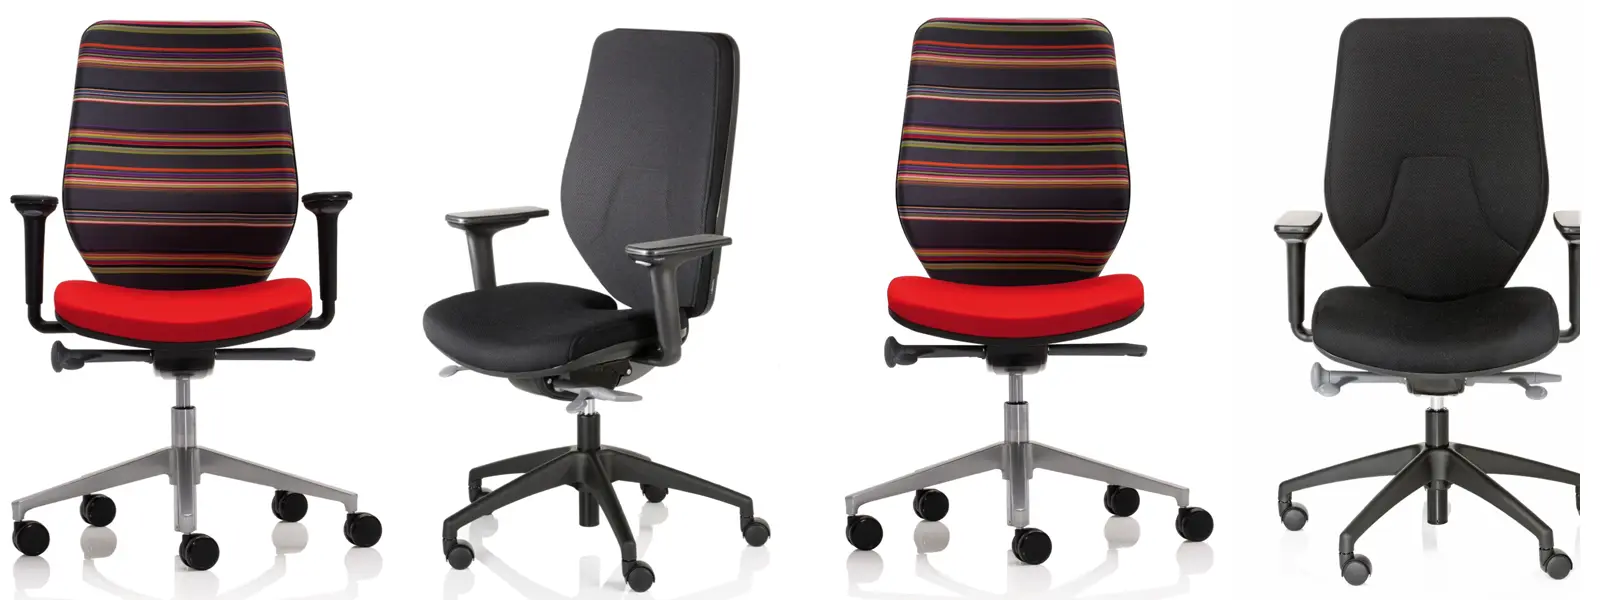 kofs office all types chairs